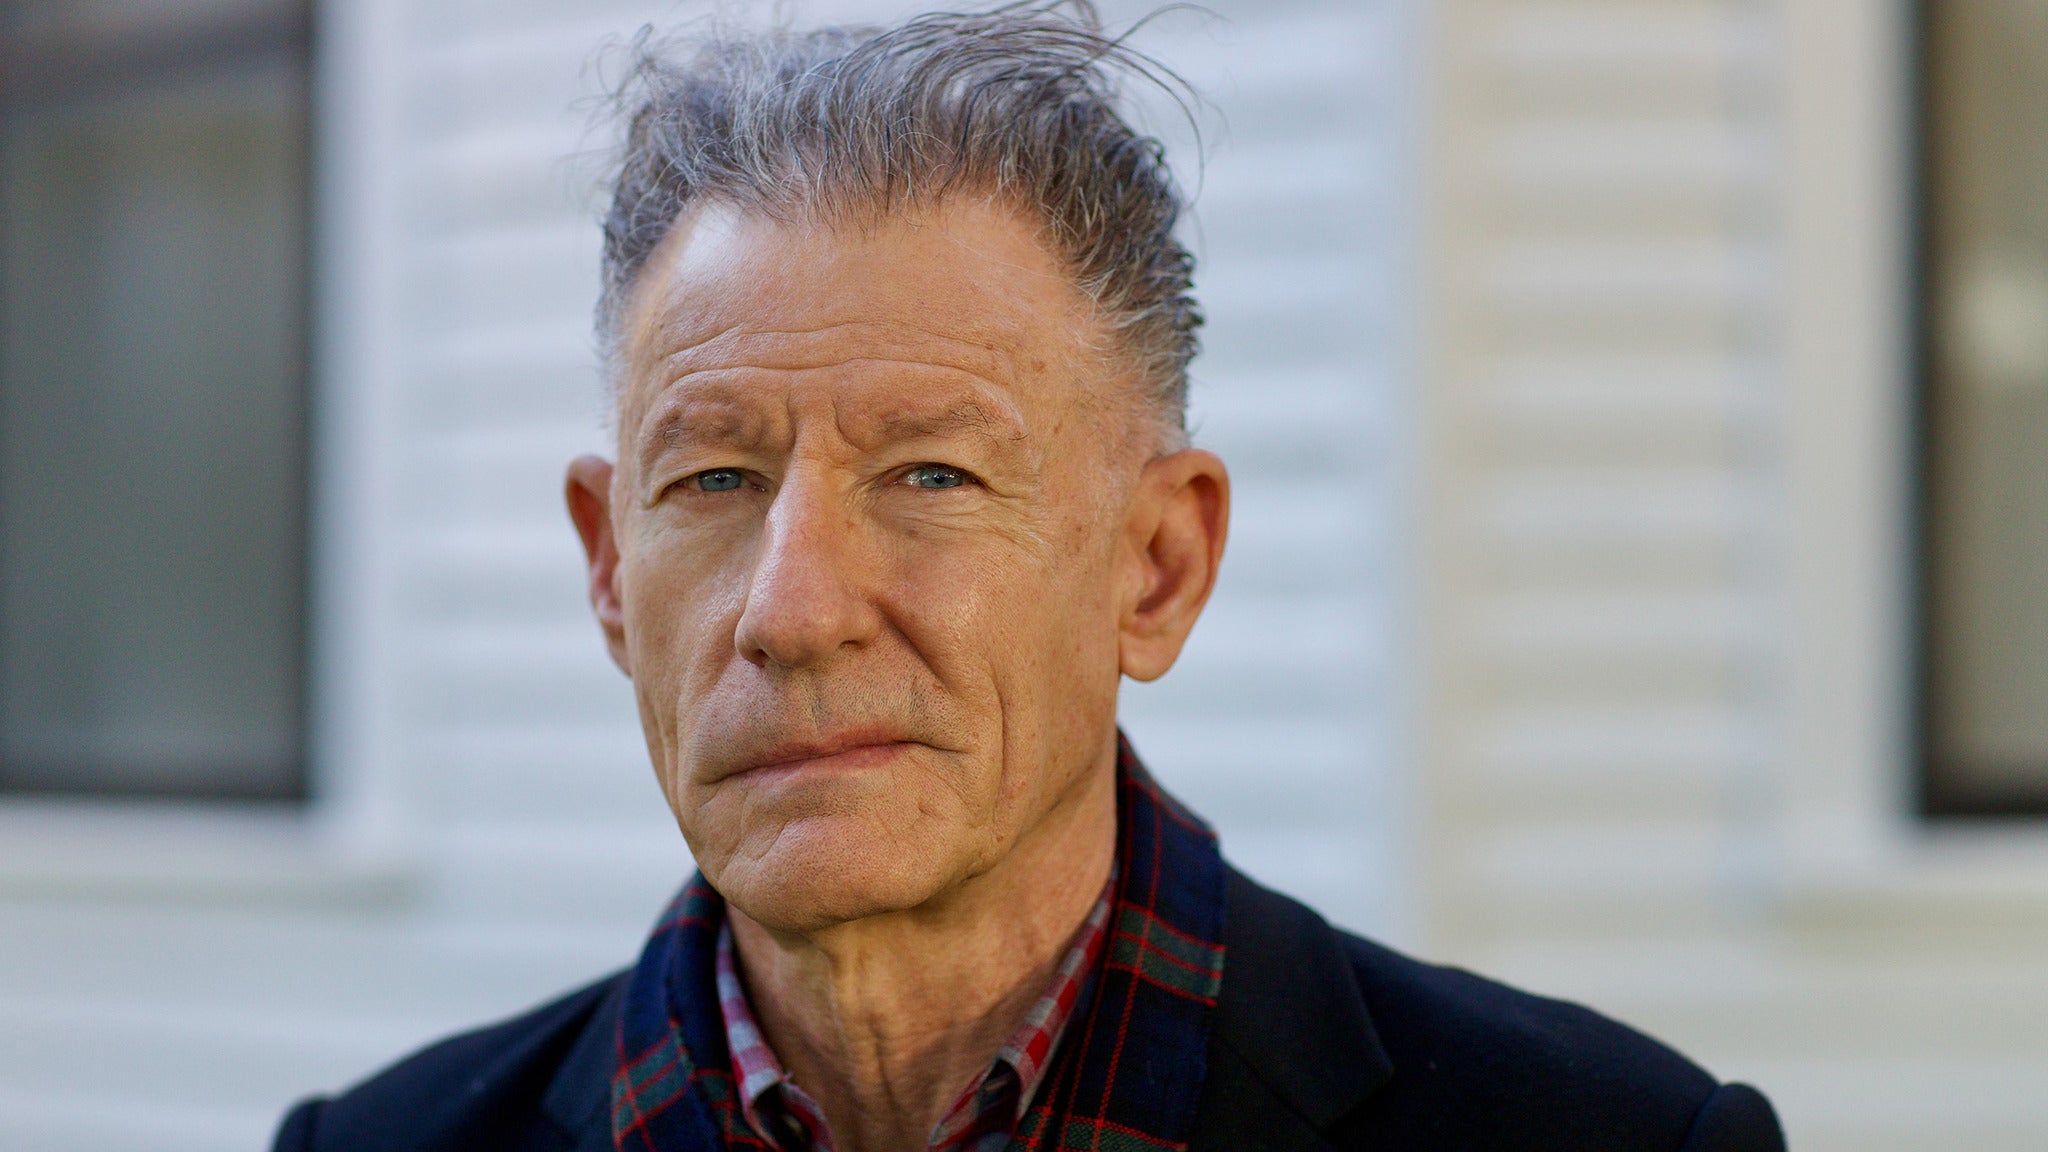 Image used with permission from Ticketmaster | Lyle Lovett and his Large Band tickets